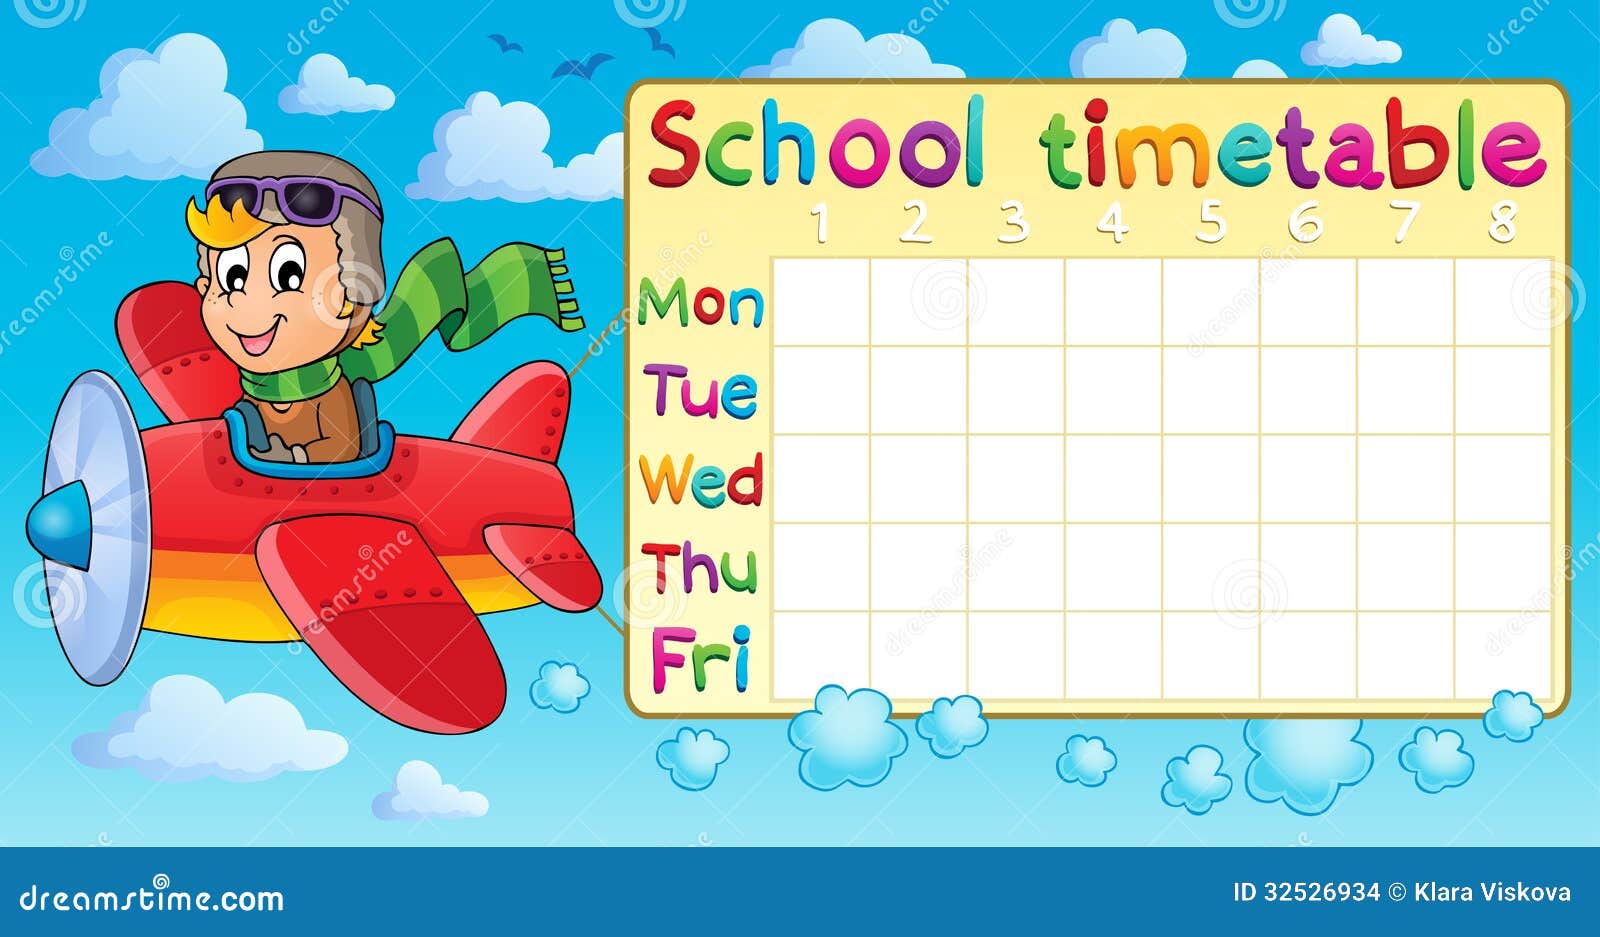 settings tumblr Image 1  Stock Thematic  School Images Image Timetable